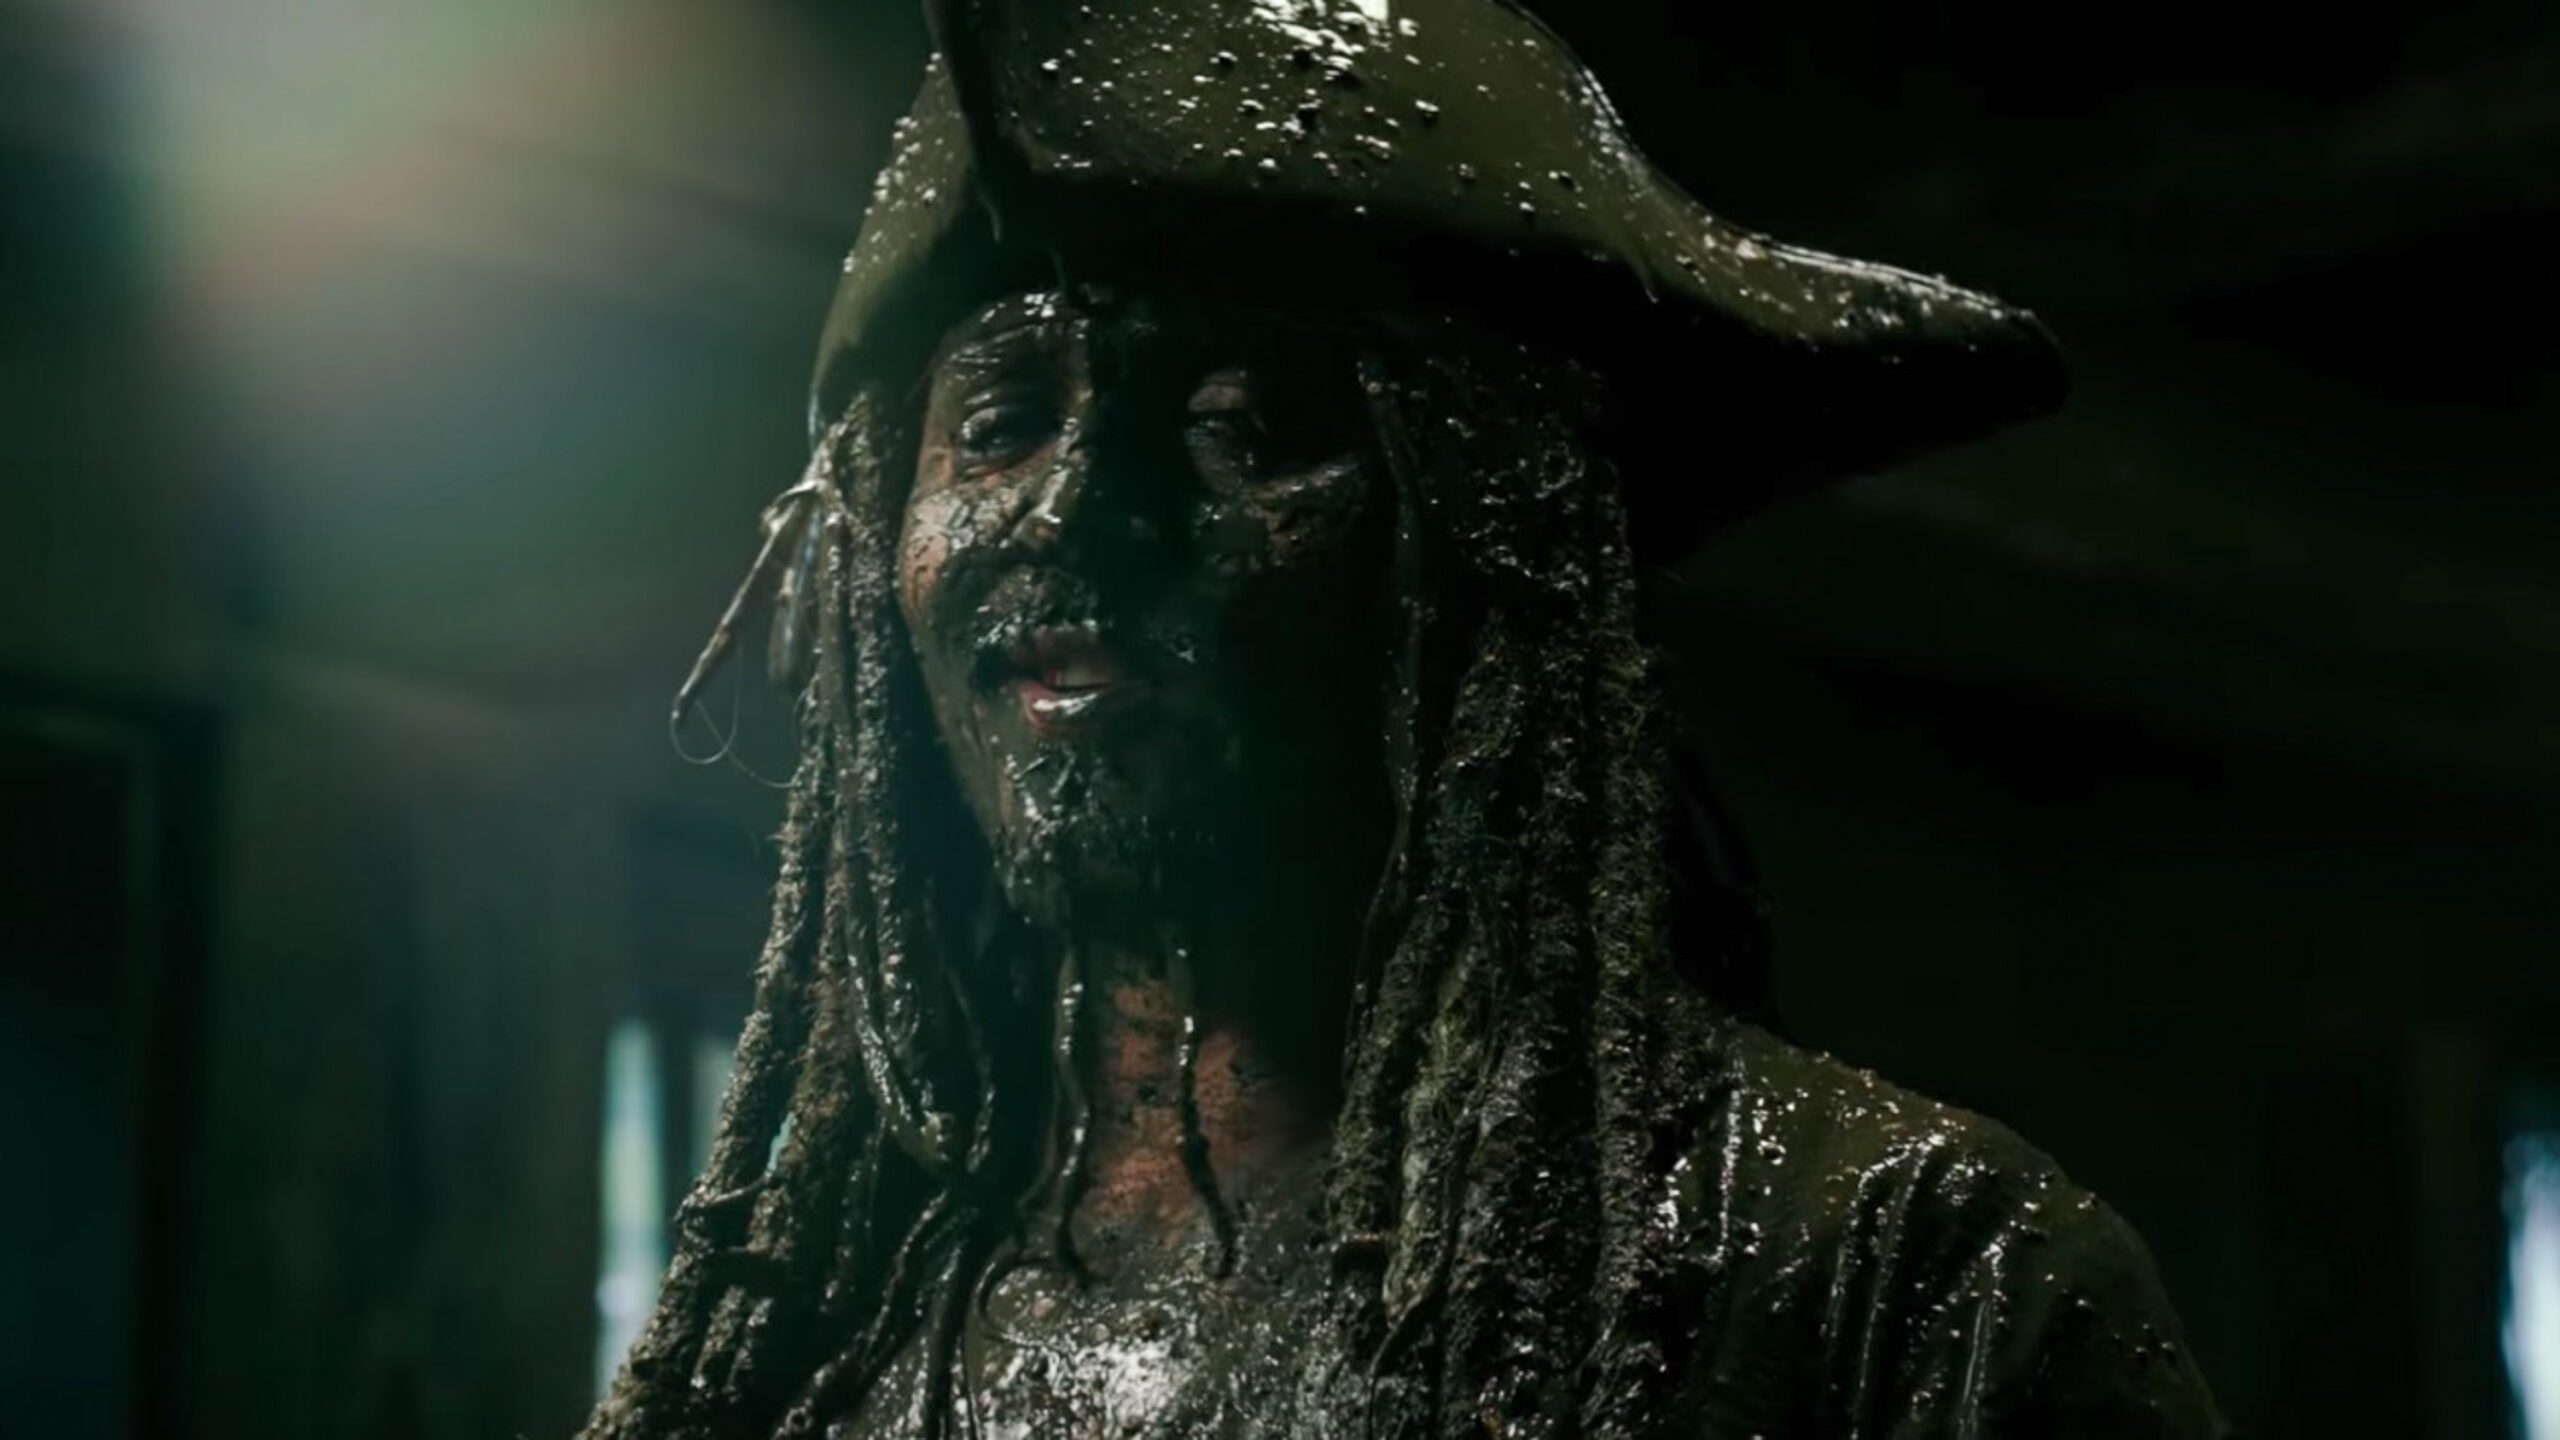 WATCH: Jack Sparrow returns in new ‘Pirates of the Caribbean 5’ teaser